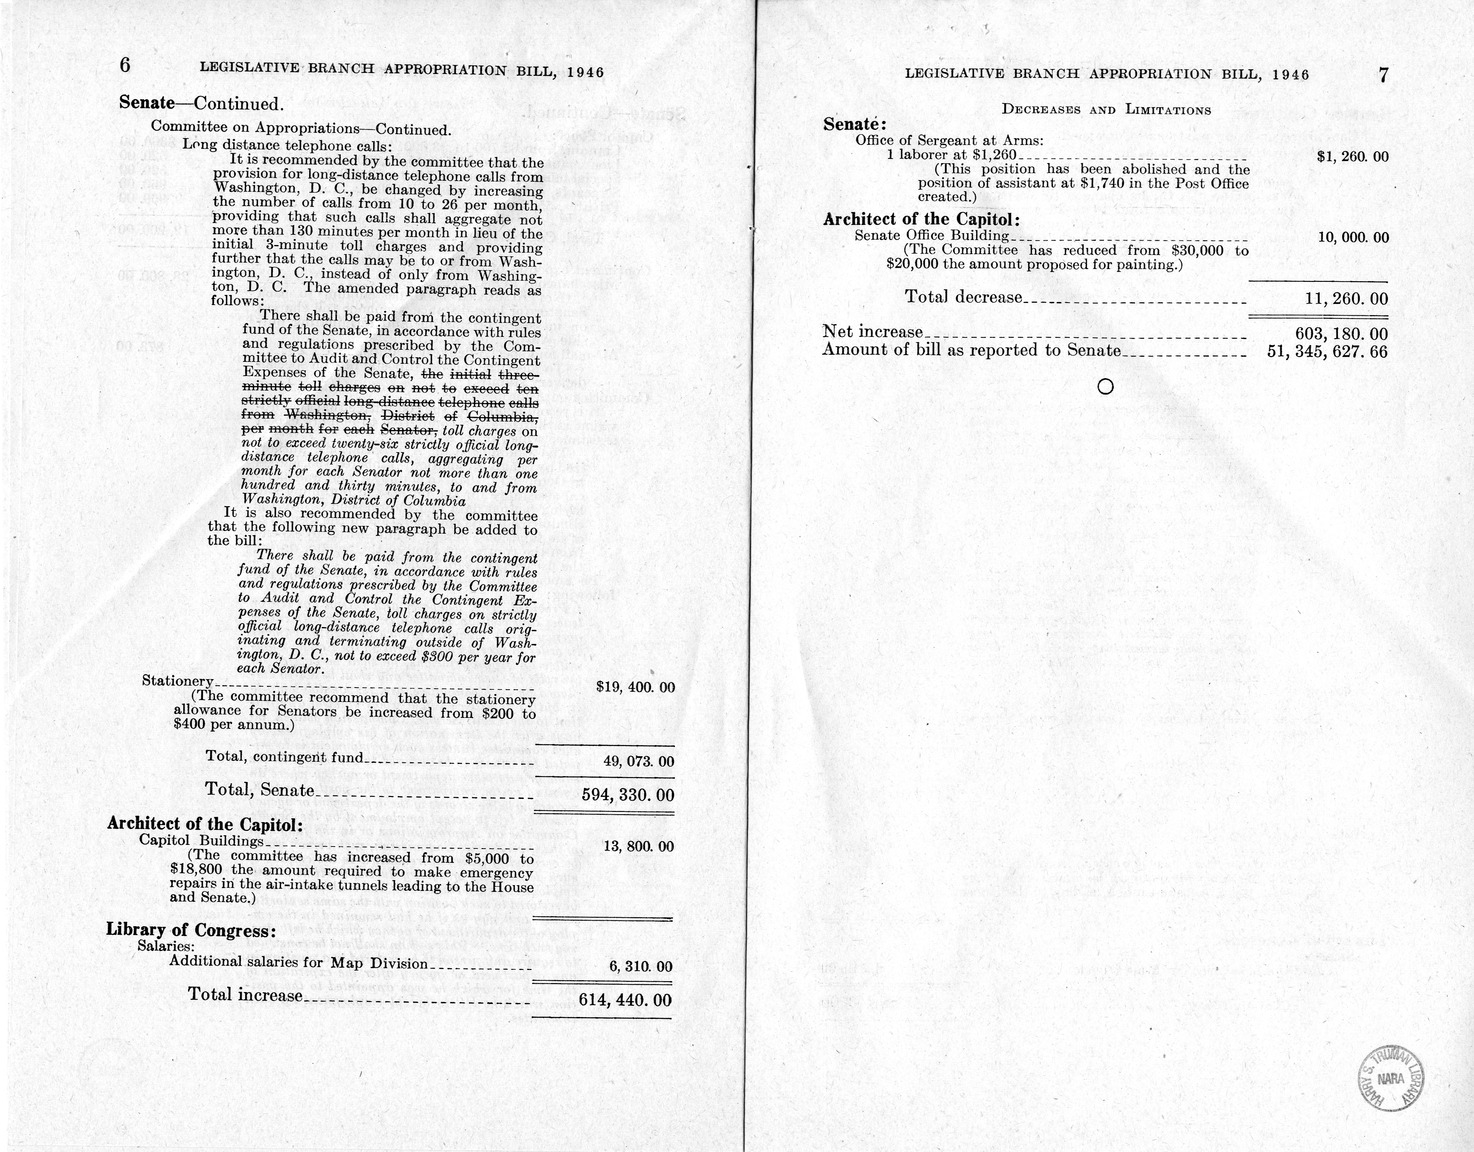 Memorandum from Harold D. Smith to M. C. Latta, H.R. 3109, Making Appropriations for the Legislative Branch for the Fiscal Year Ending June 30, 1946, with Attachments